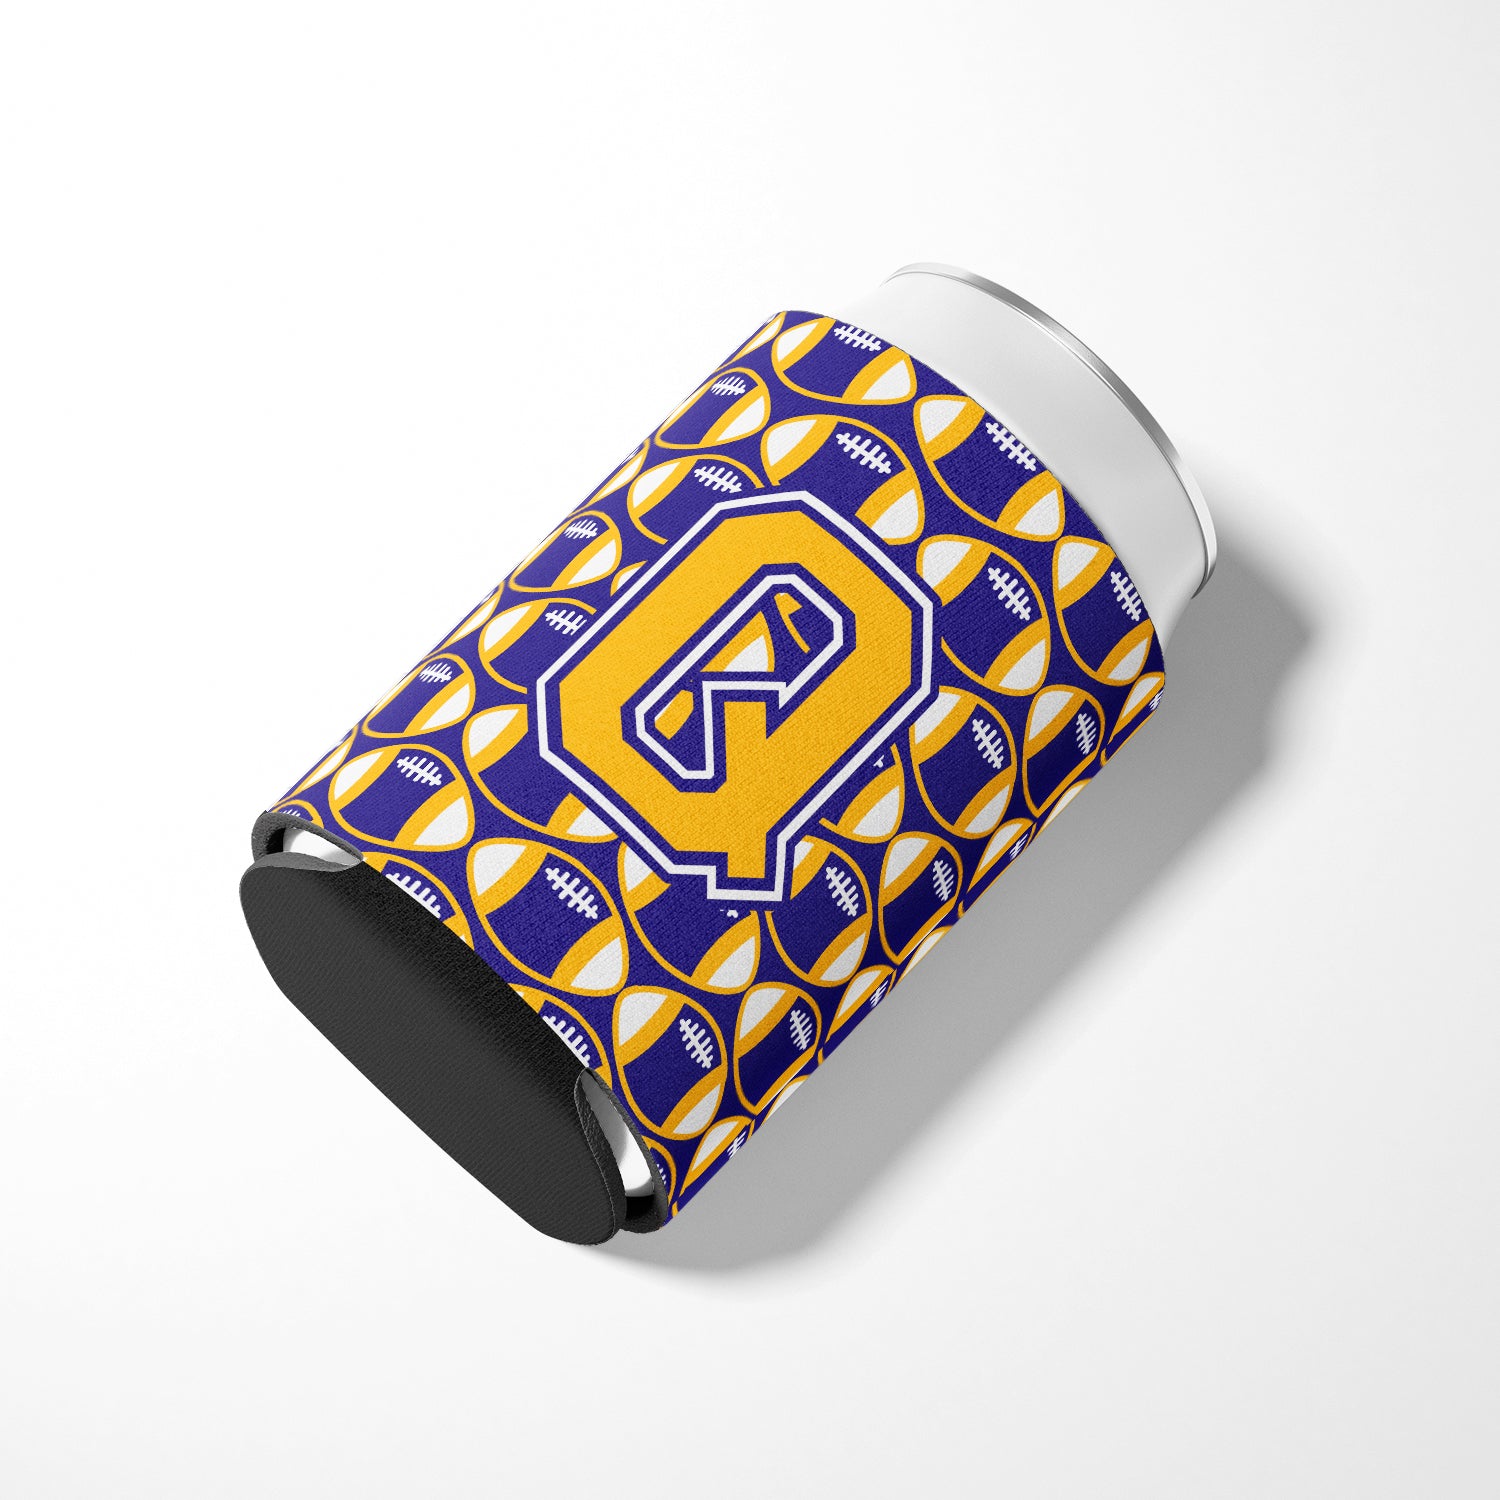 Letter Q Football Purple and Gold Can or Bottle Hugger CJ1064-QCC